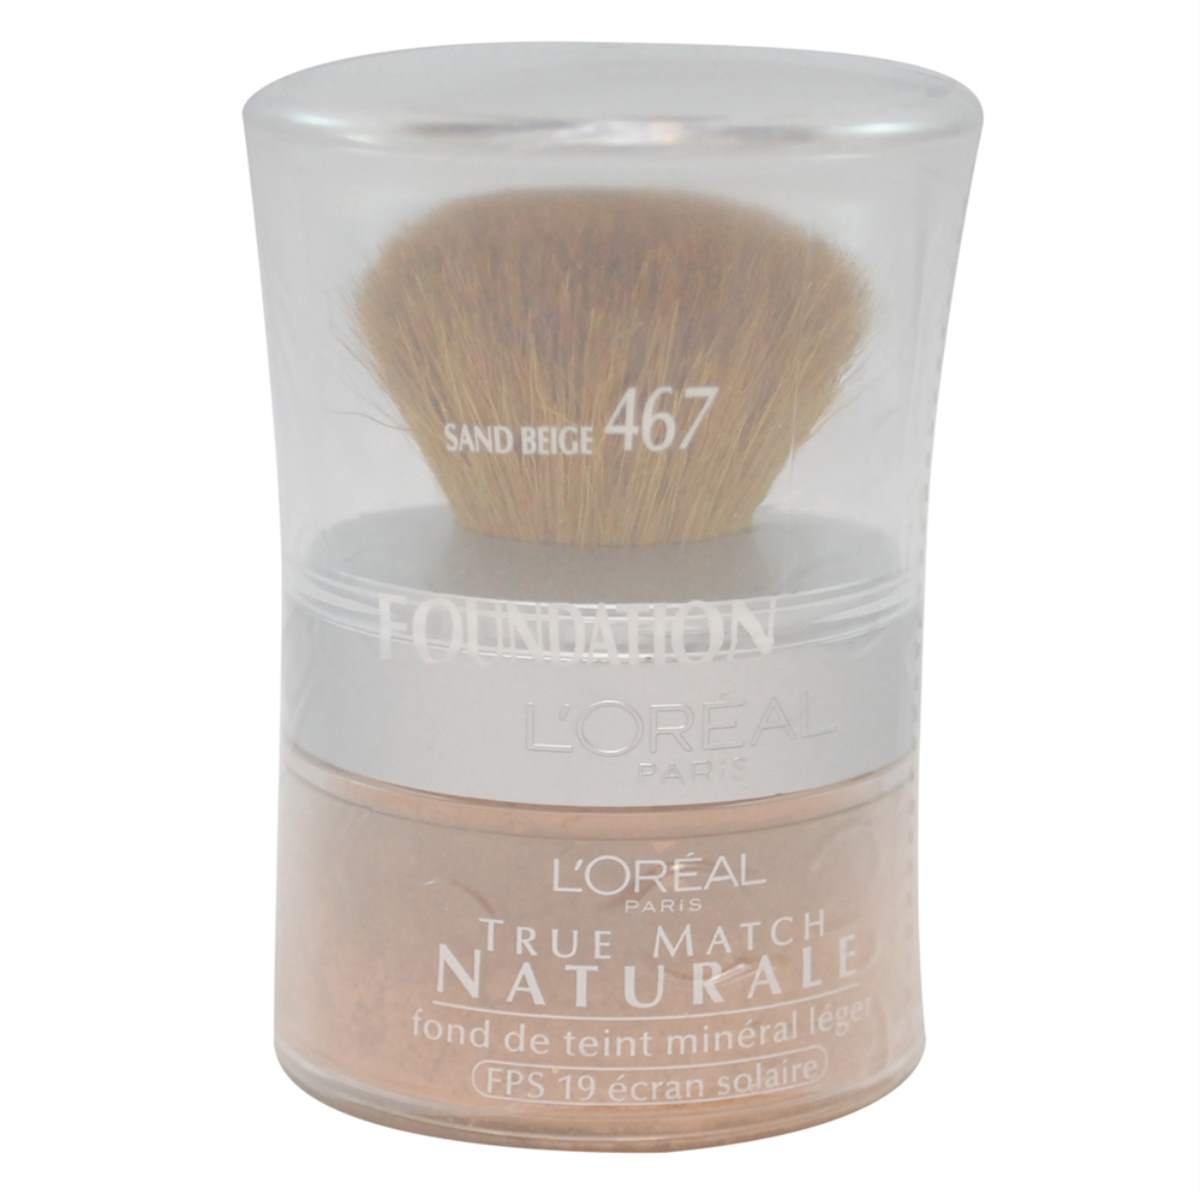 L'oreal True Match Naturale Mineral Foundation, Sand Beige, 0.35-Ounce